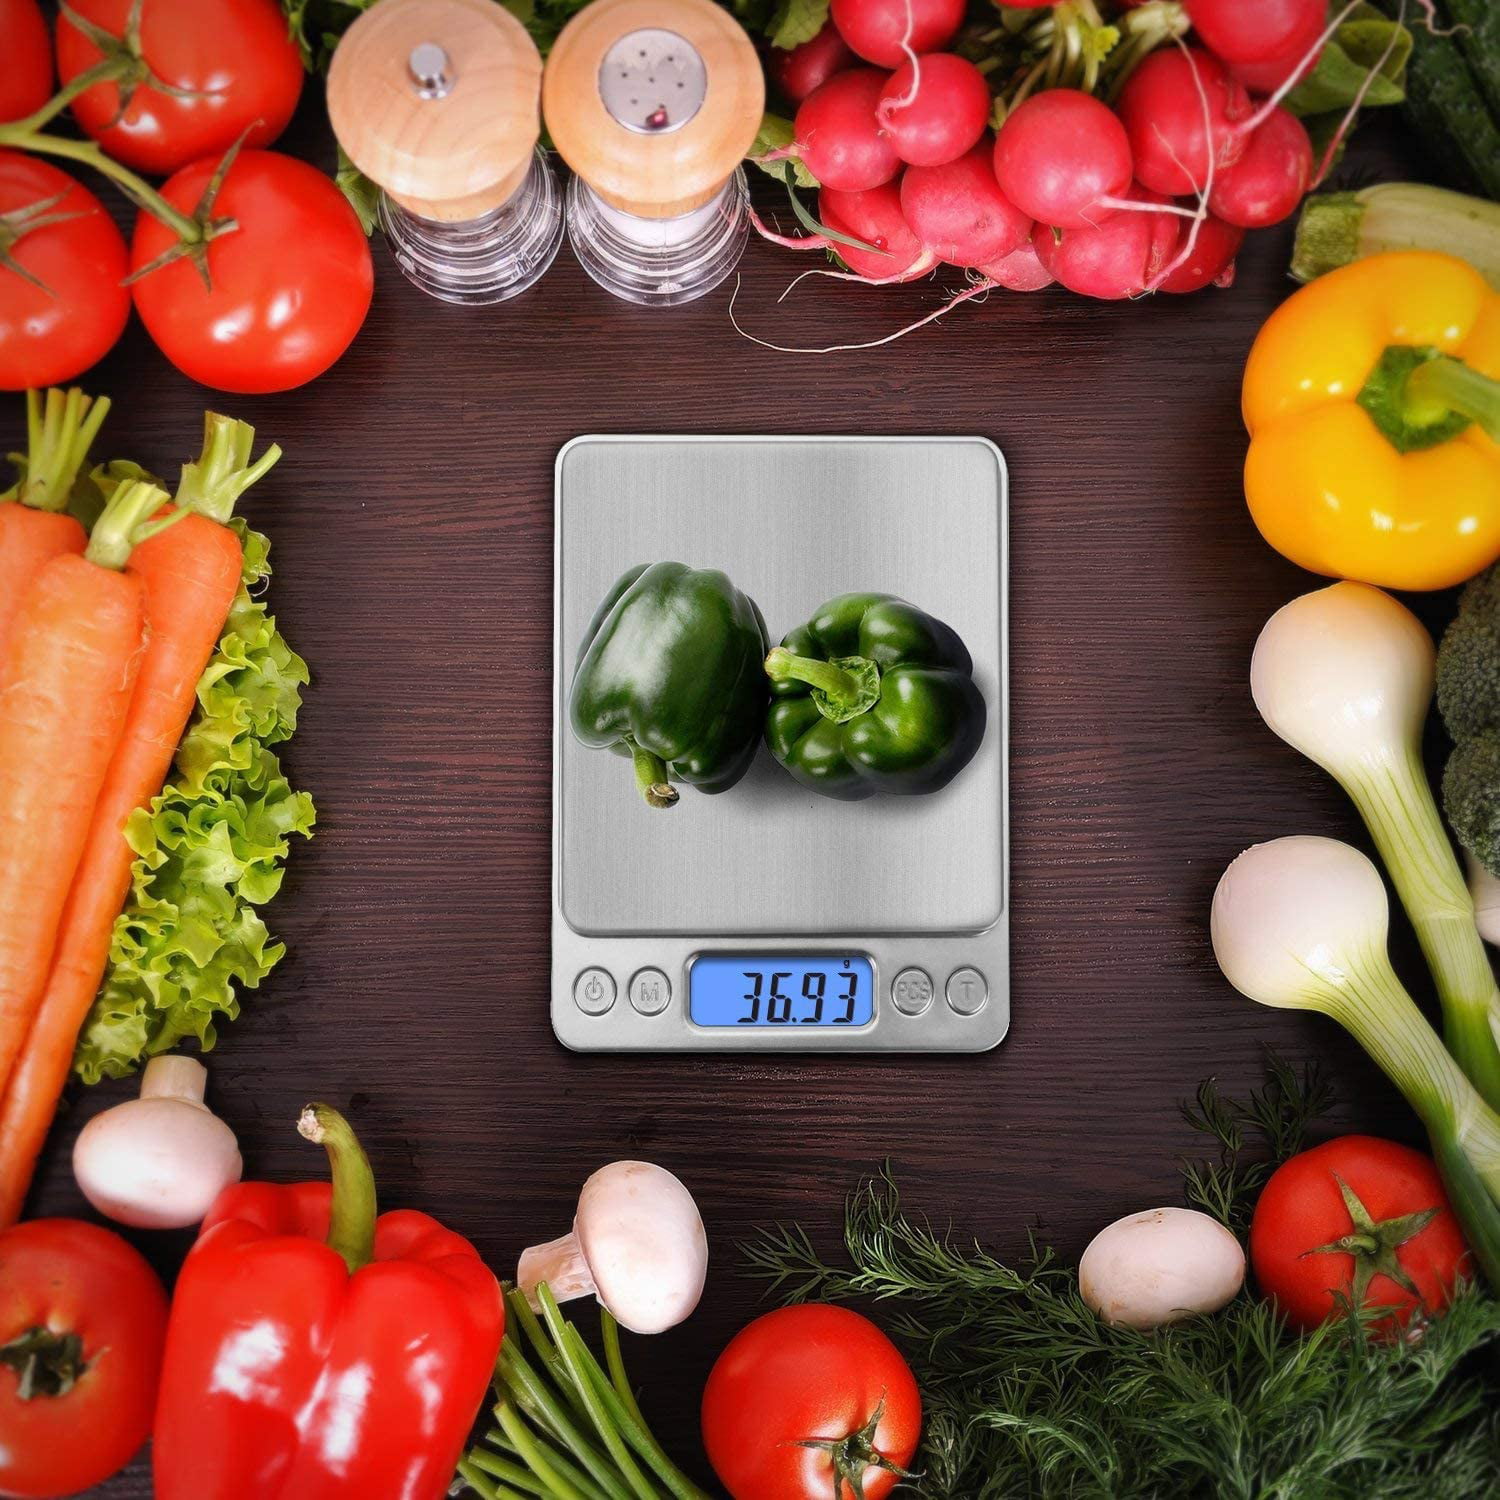  Digital Food Kitchen Scale, small microgram scale 0.01